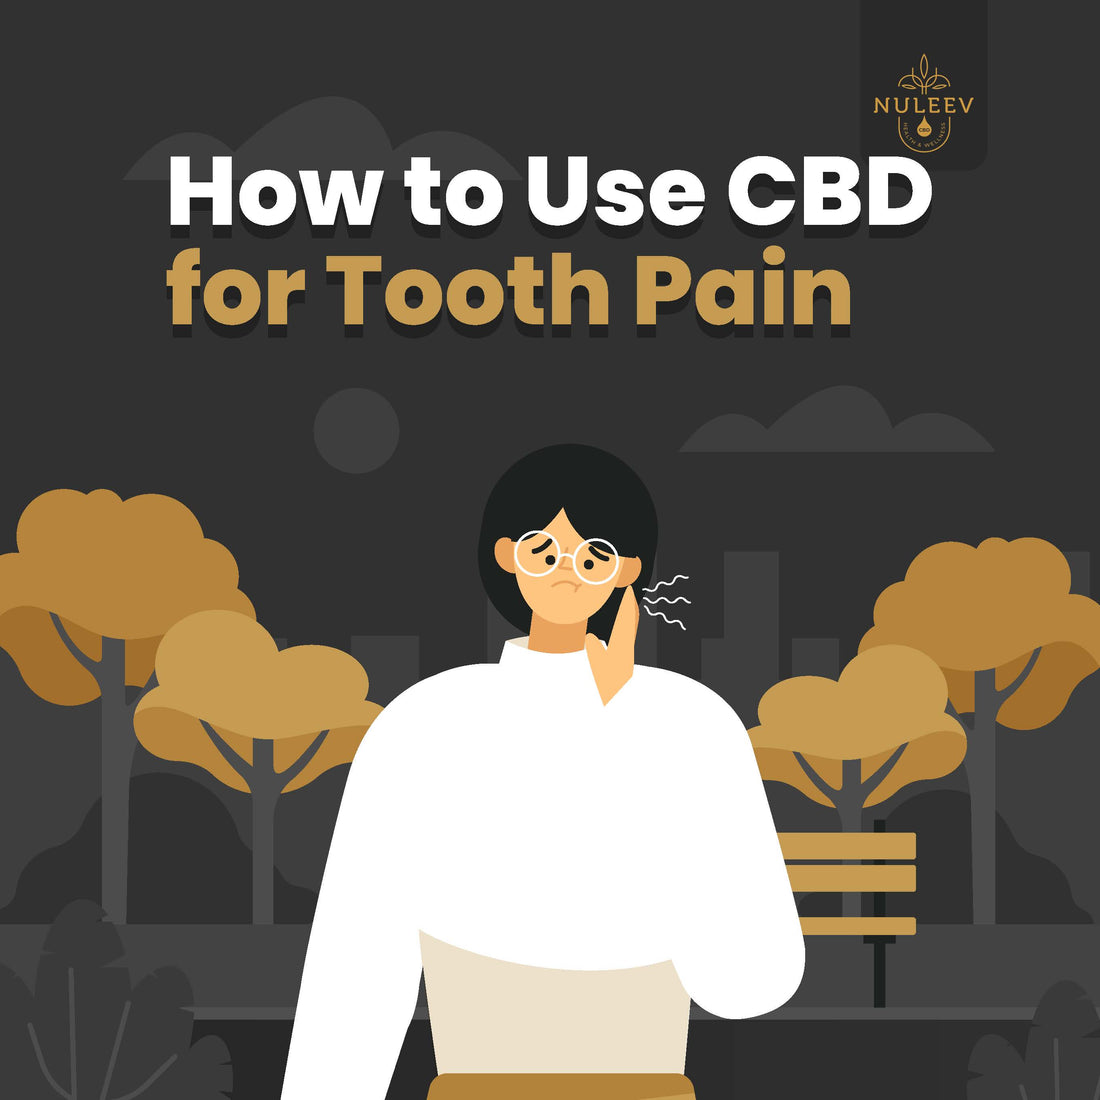 How to Use CBD for Tooth Pain